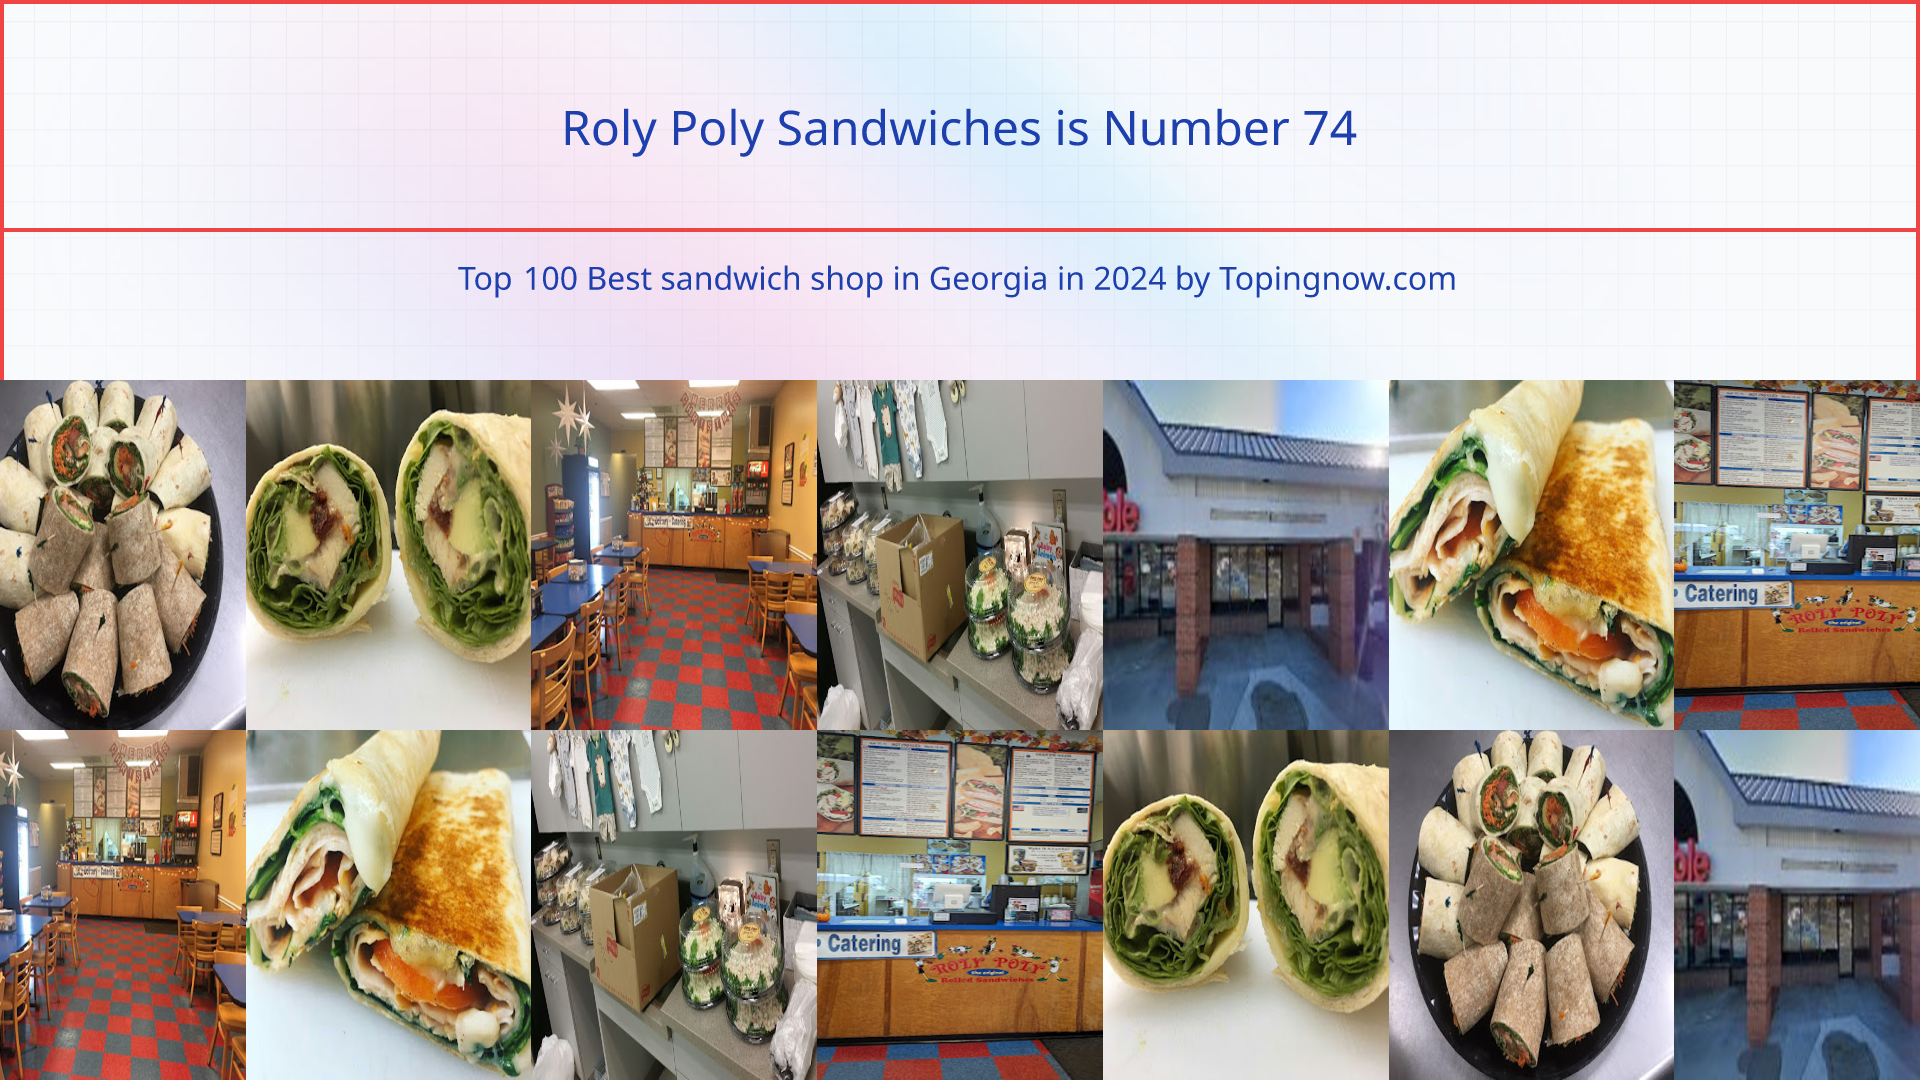 Roly Poly Sandwiches: Top 100 Best sandwich shop in Georgia in 2024